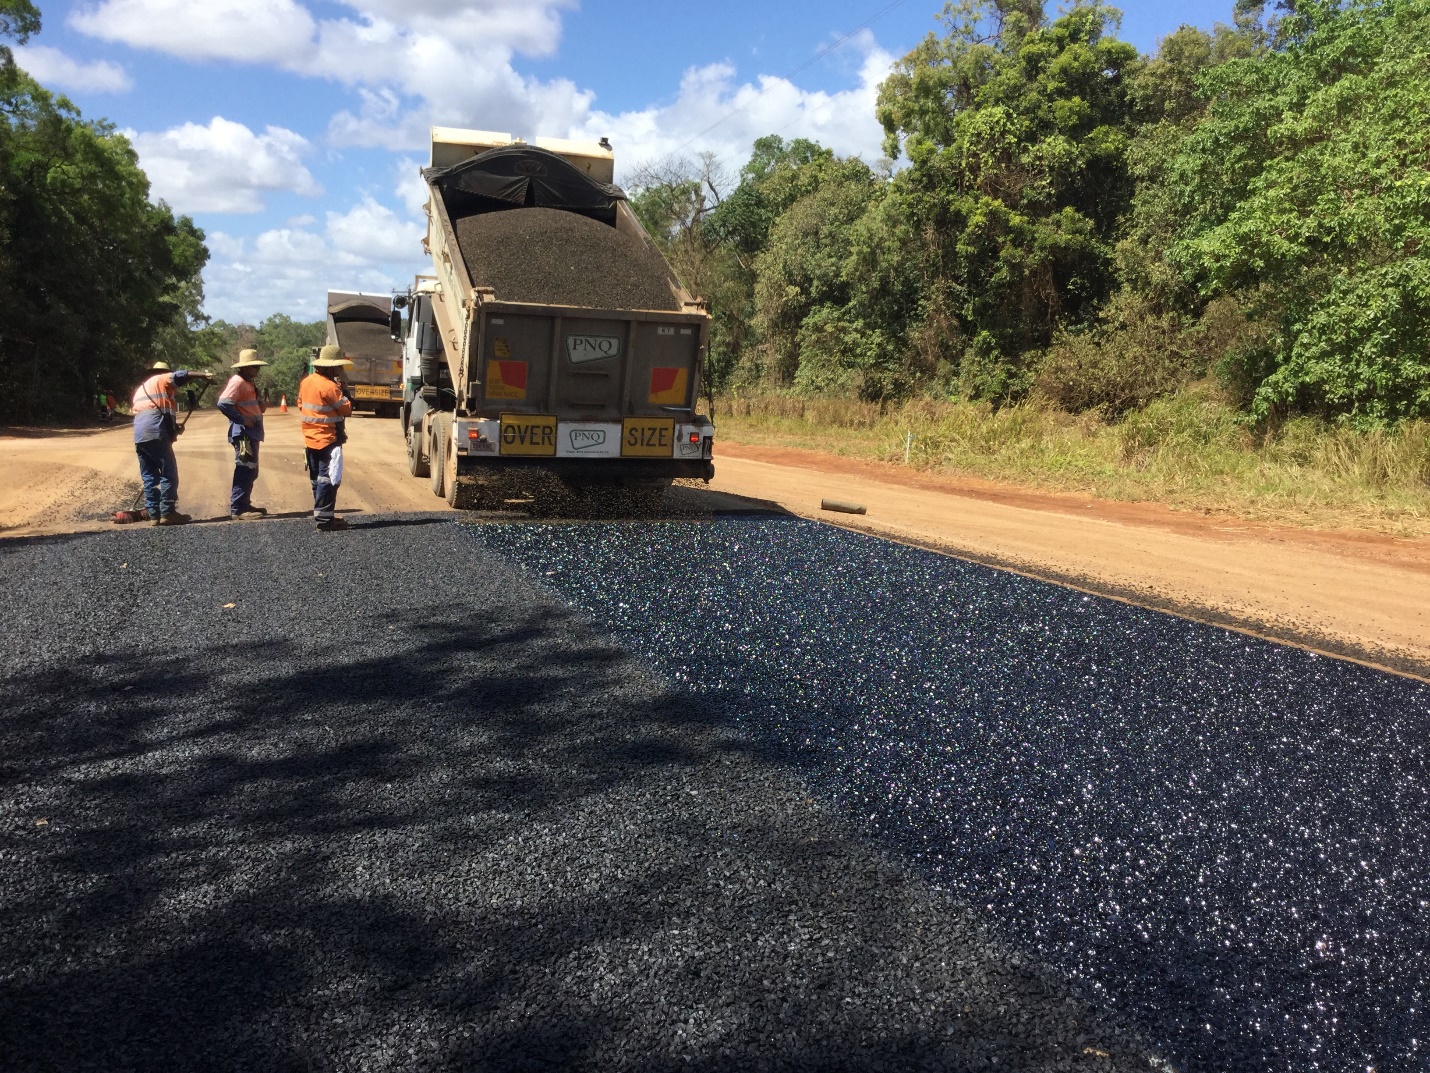 Workers with a truck laying road surface